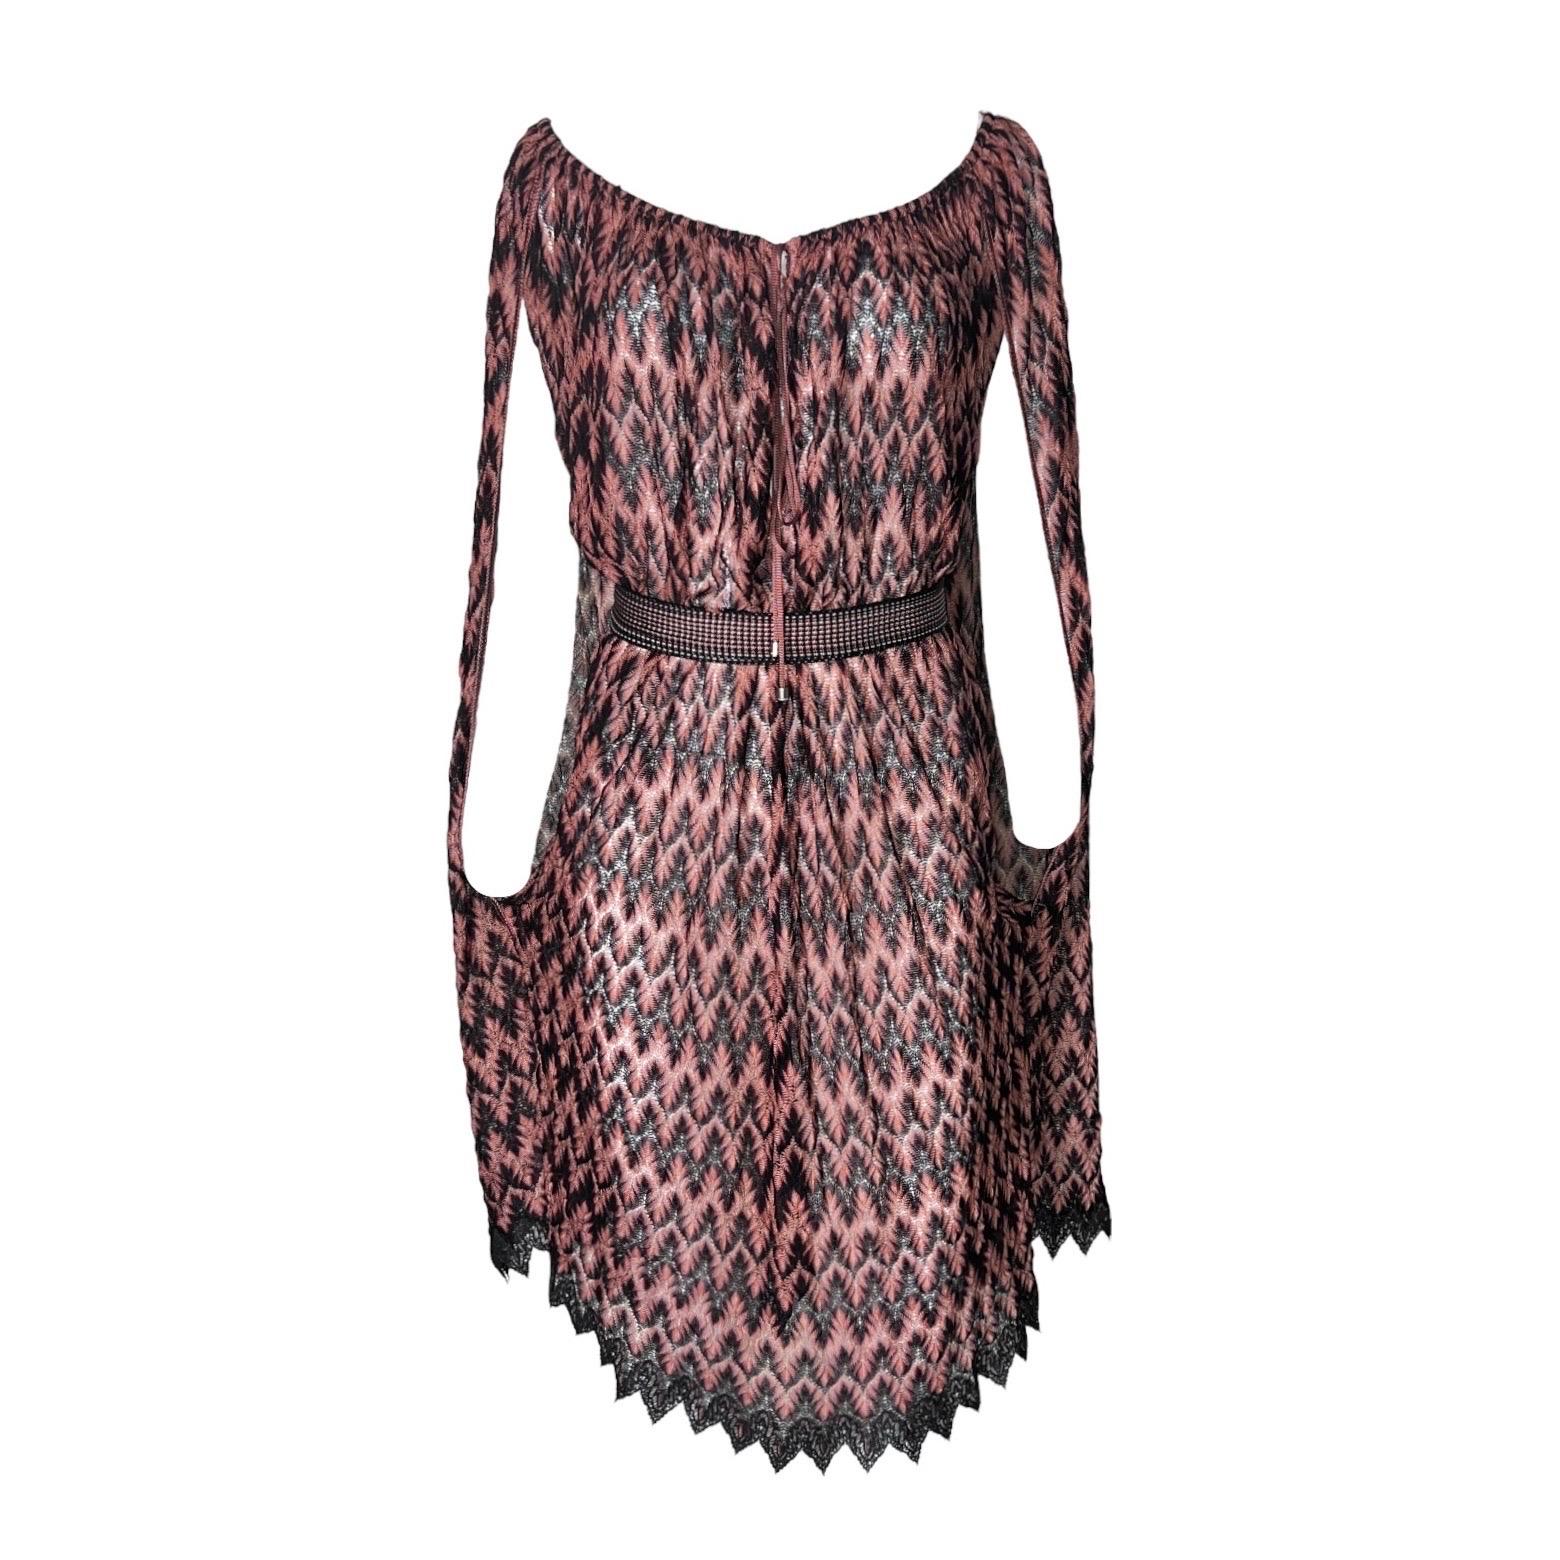 NEW Missoni Rare Belted Cape Dress Peek-a-boo neckline & Lace Trimming S For Sale 2